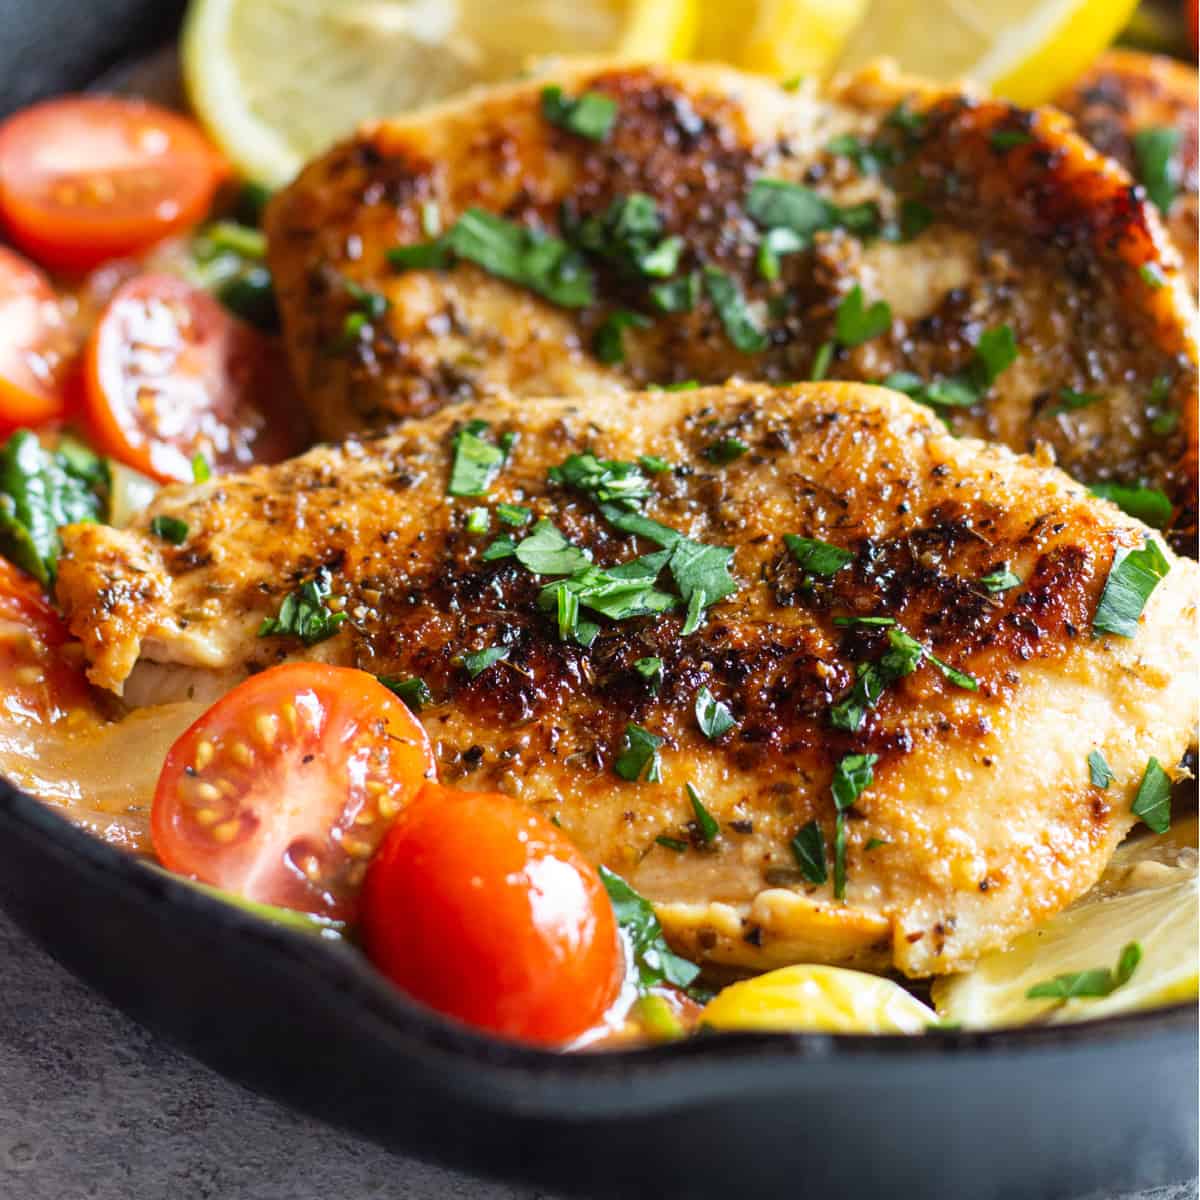 Ready in 30 minutes, this Italian chicken skillet recipe is a great option for a healthy and comforting dinner. This is a simple skillet chicken recipe that calls for real ingredients and is seasoned with bright spices and lemon.
